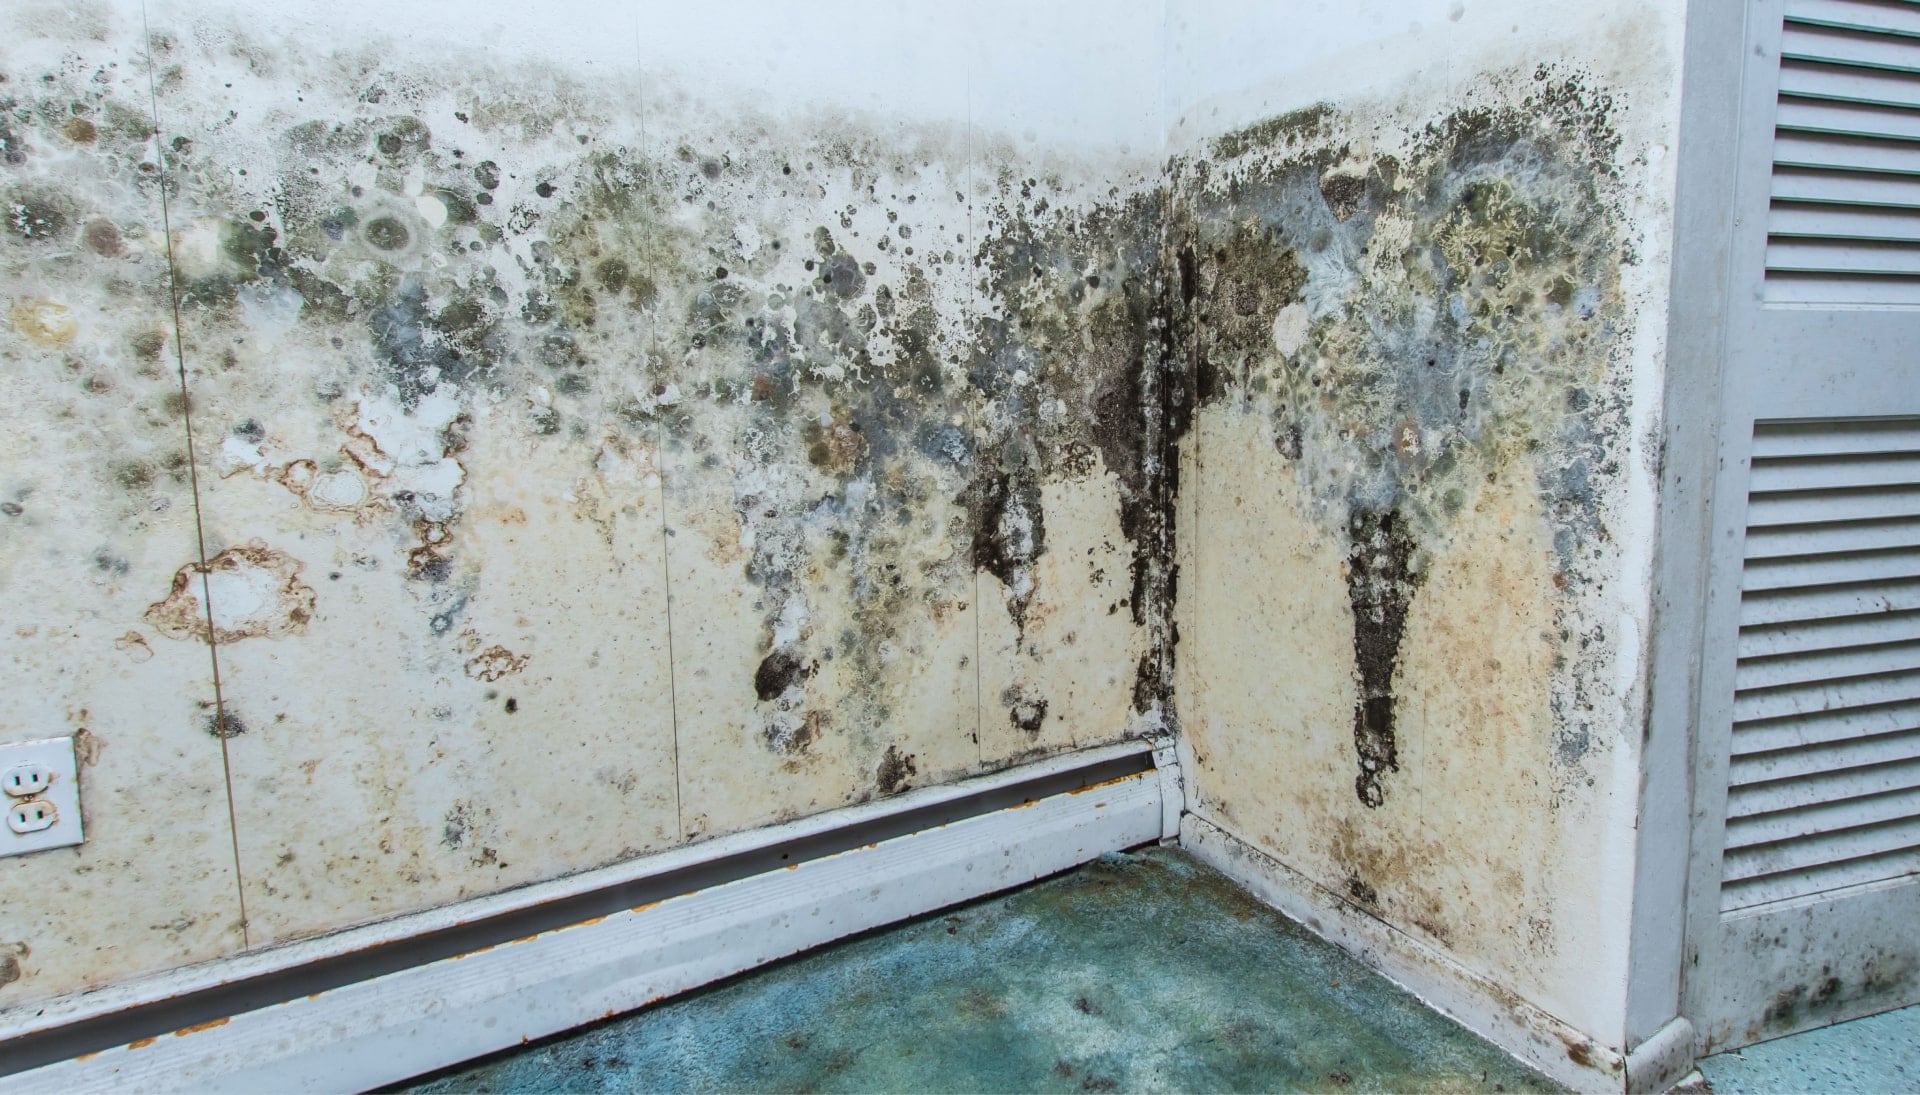 Professional mold removal, odor control, and water damage restoration service in Ocala, Florida.